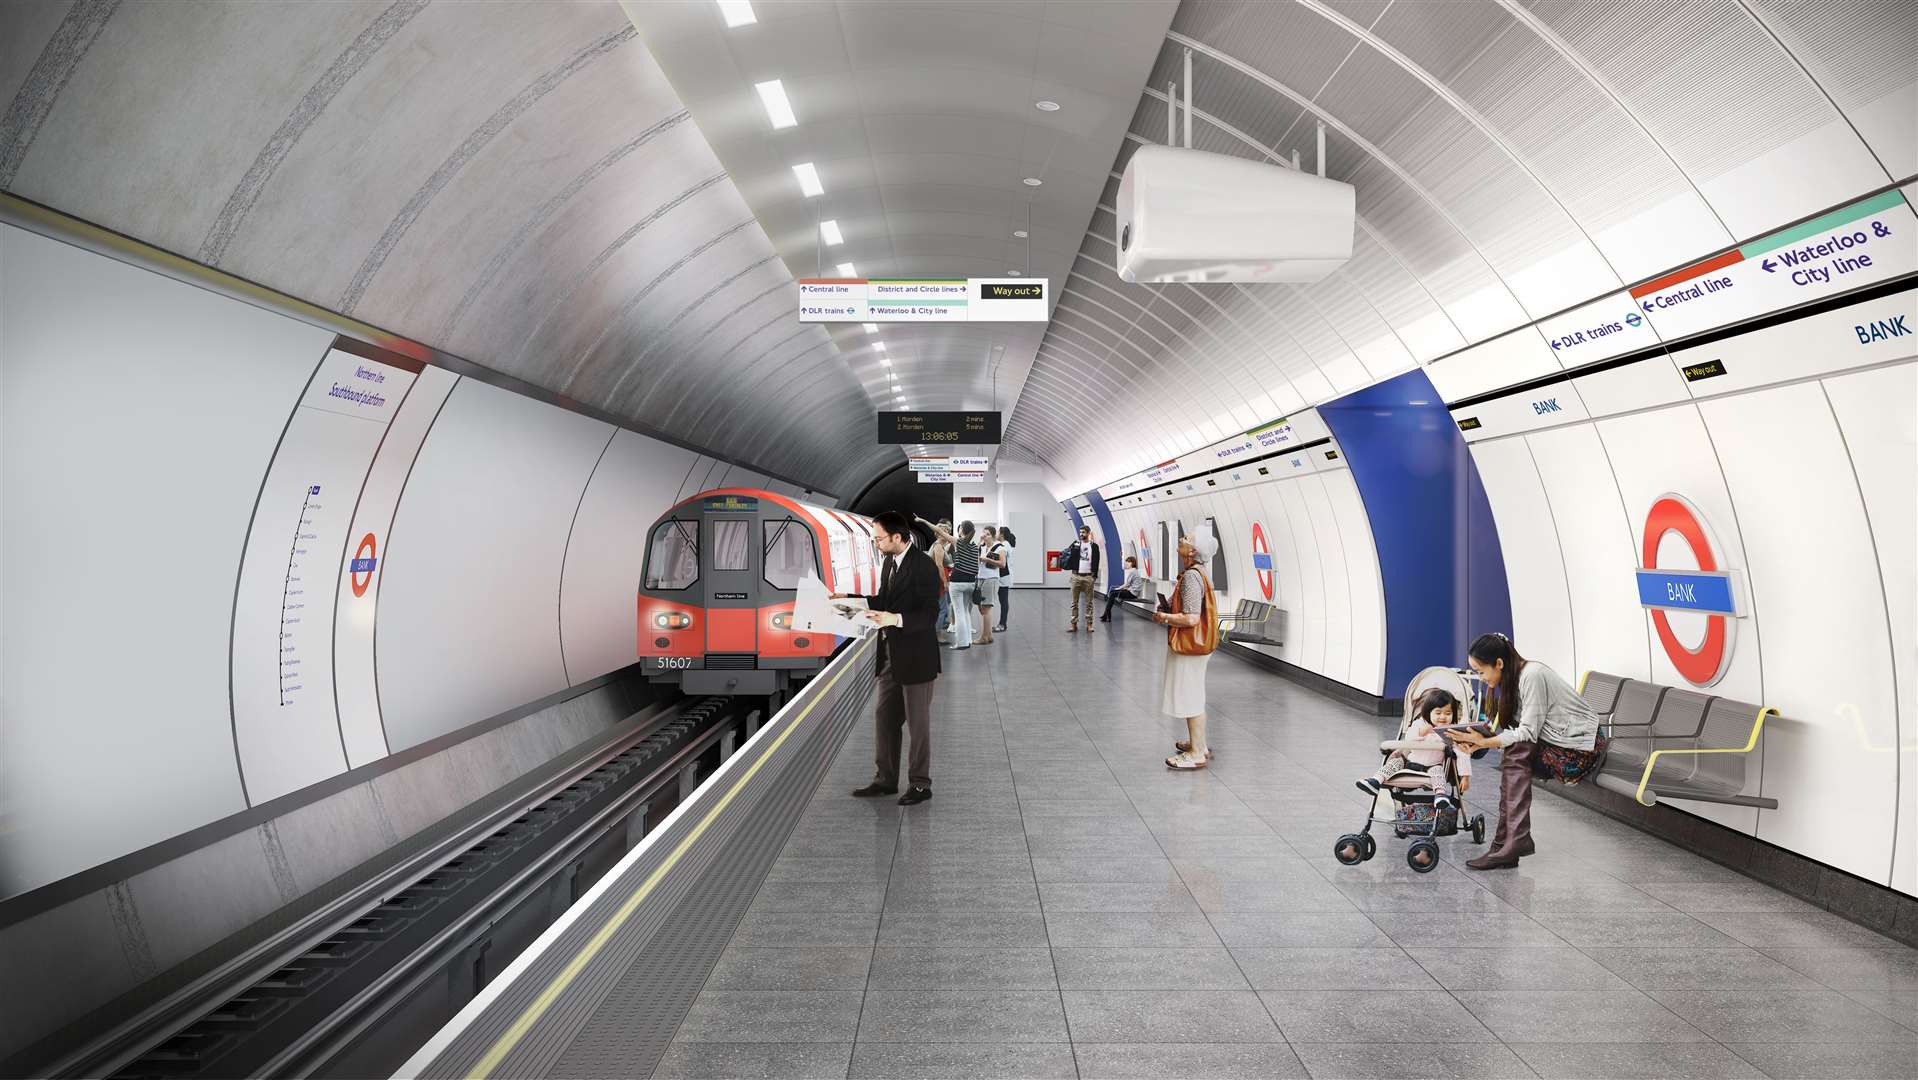 Passengers are being asked to avoid London Underground